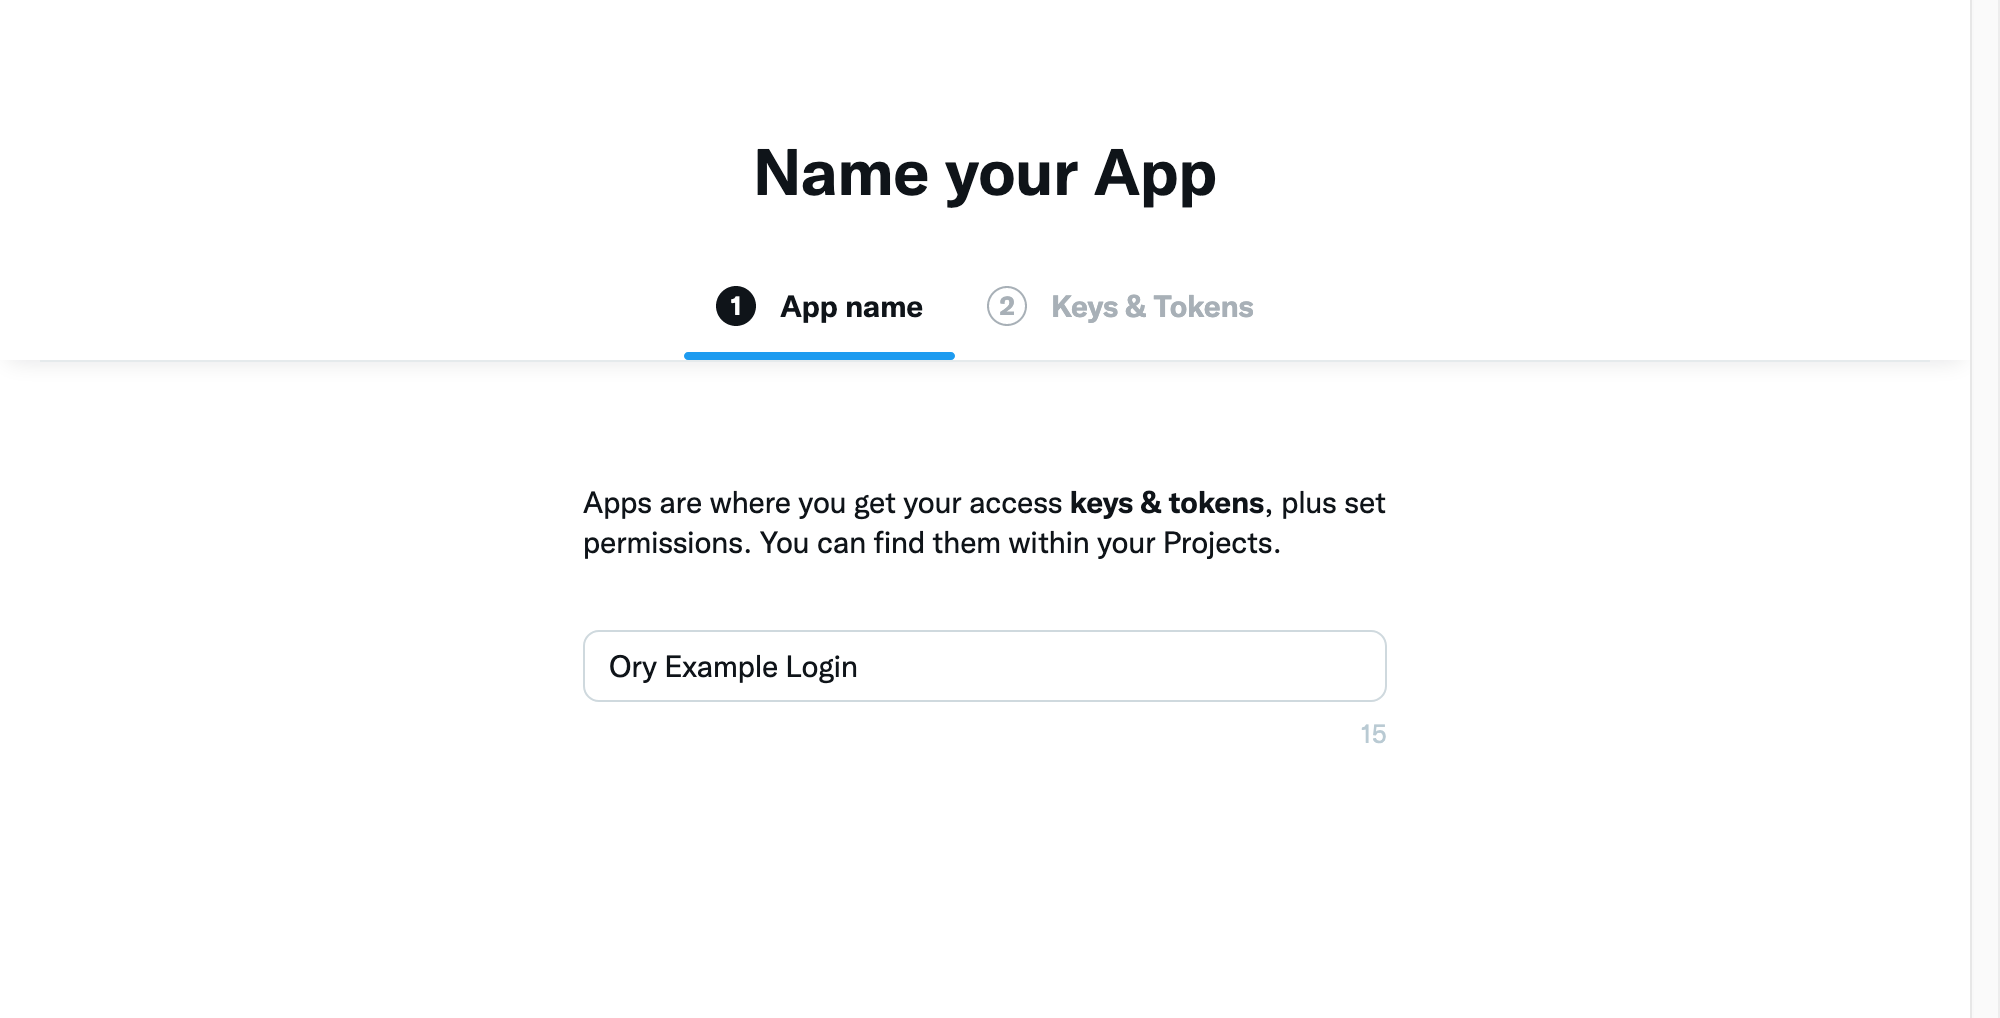 Twitter Social Sign In asks for application name